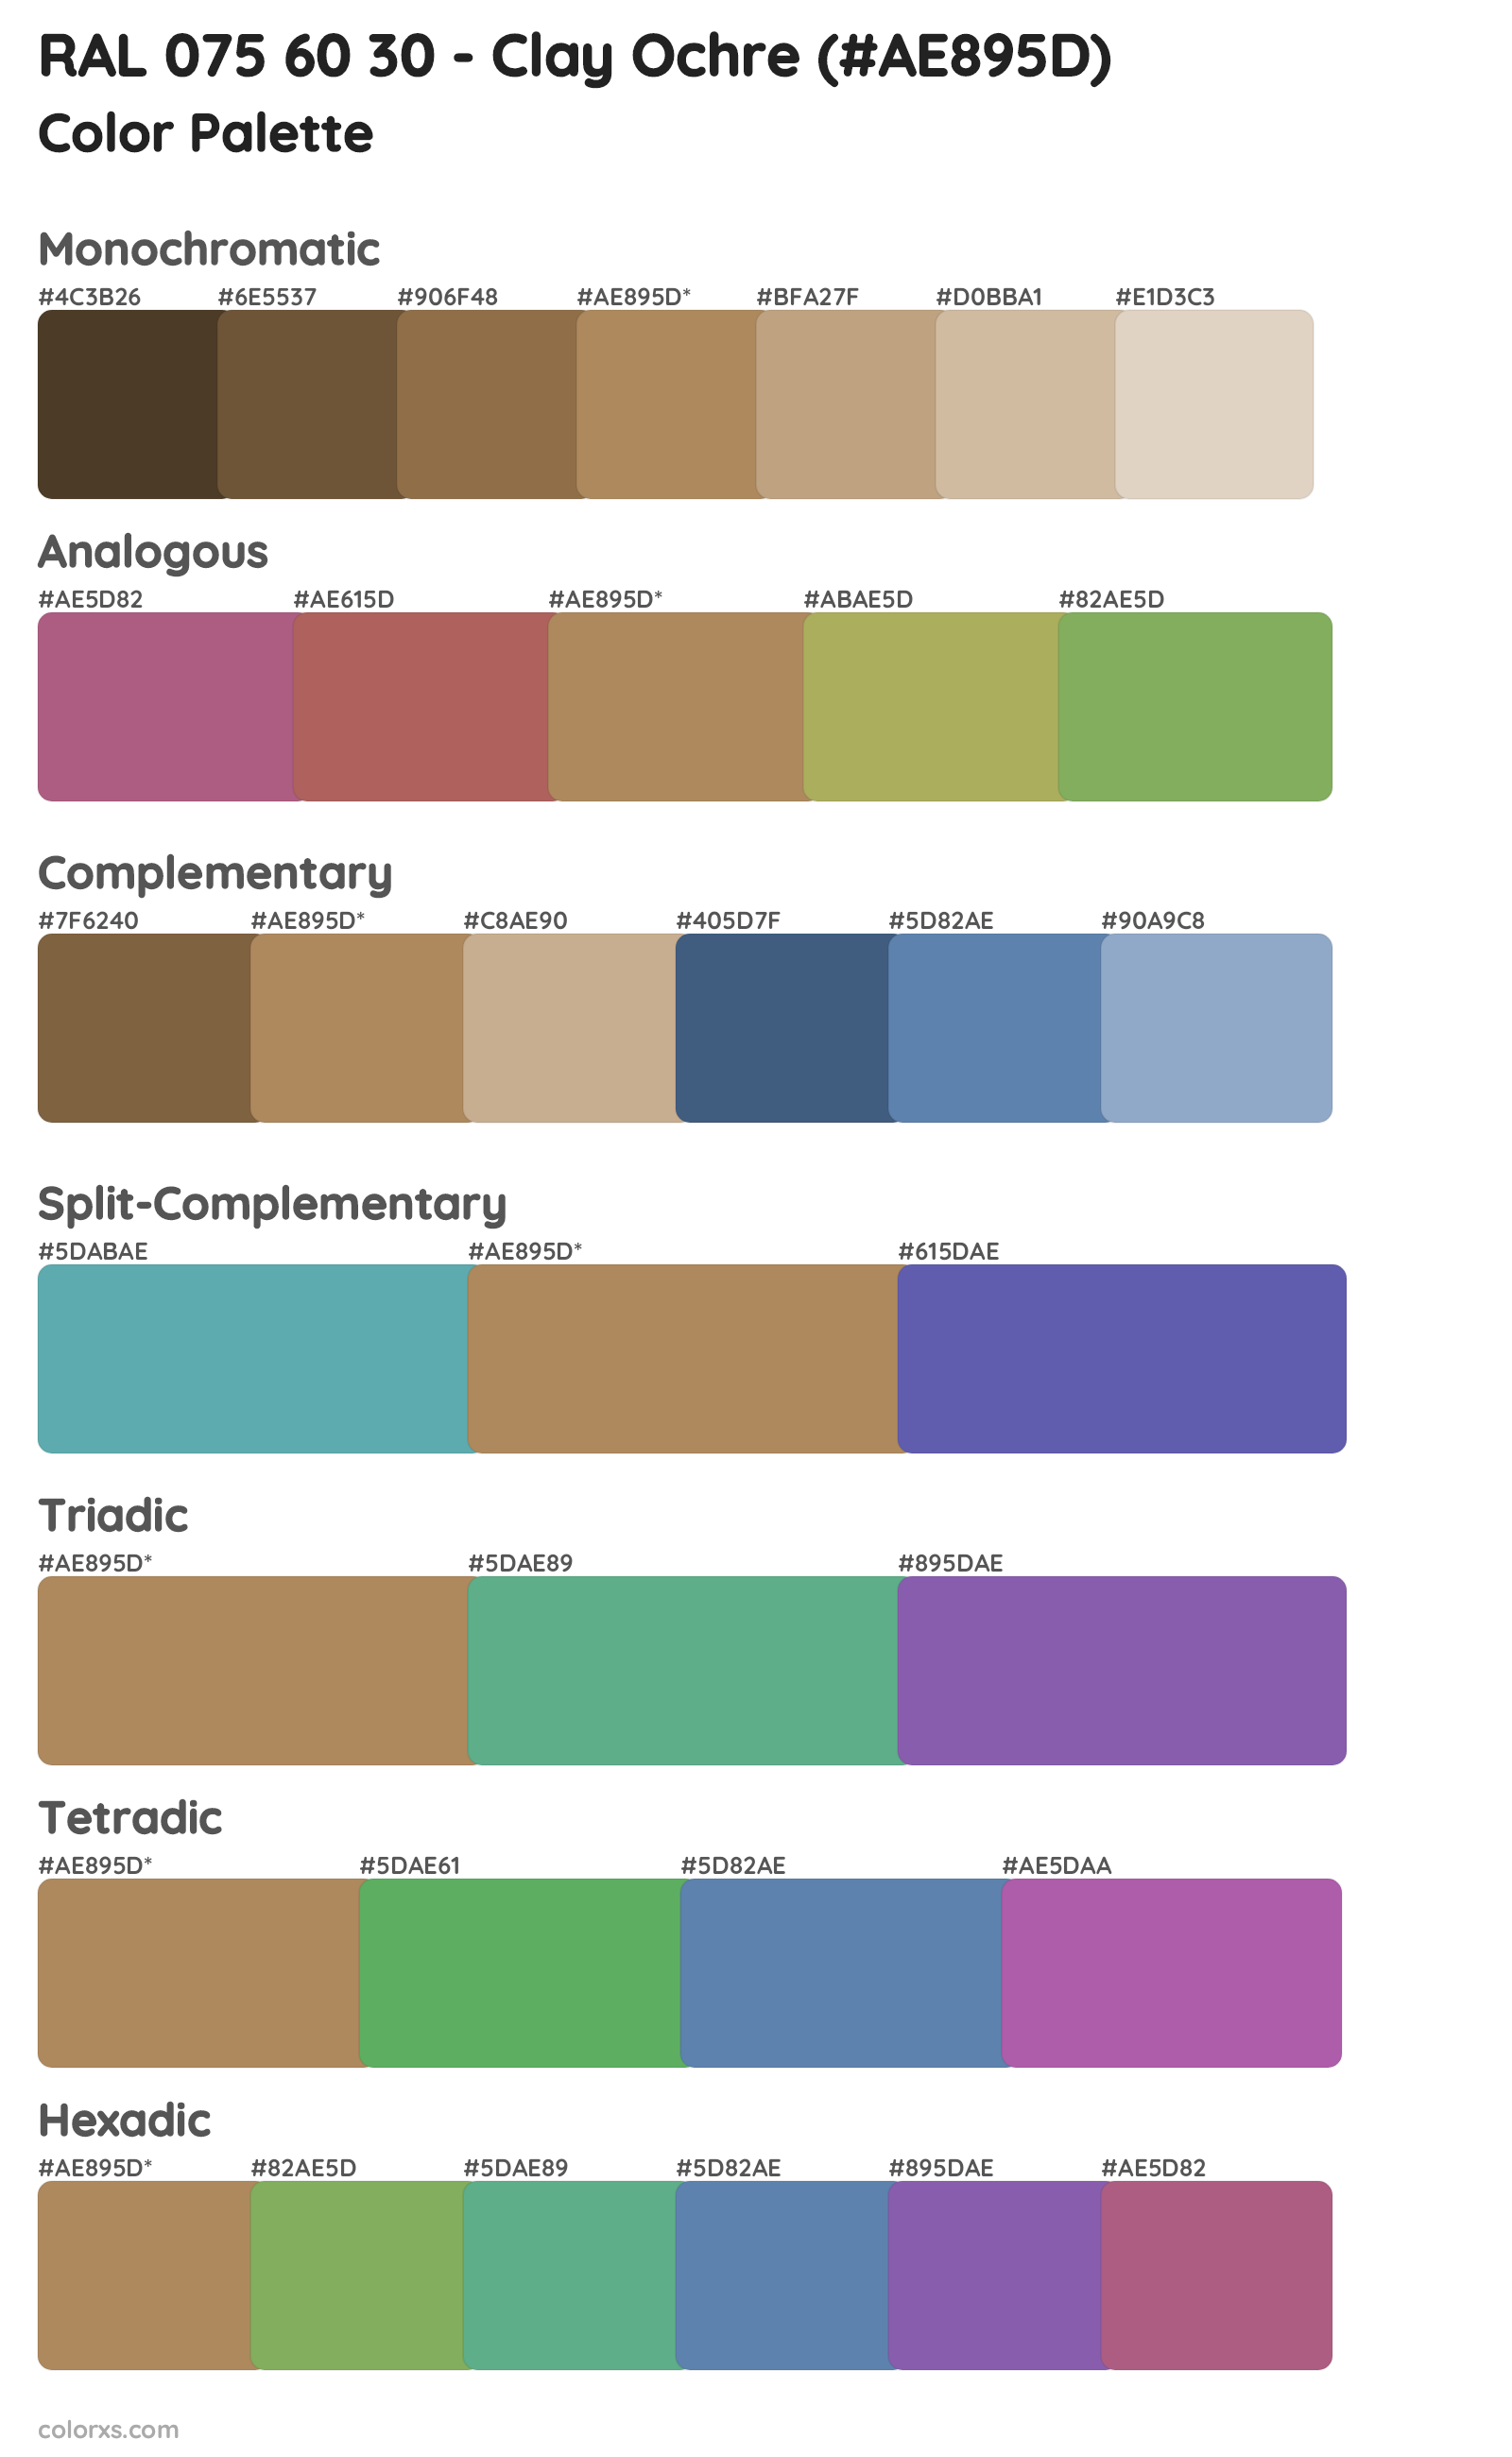 RAL 075 60 30 - Clay Ochre Color Scheme Palettes